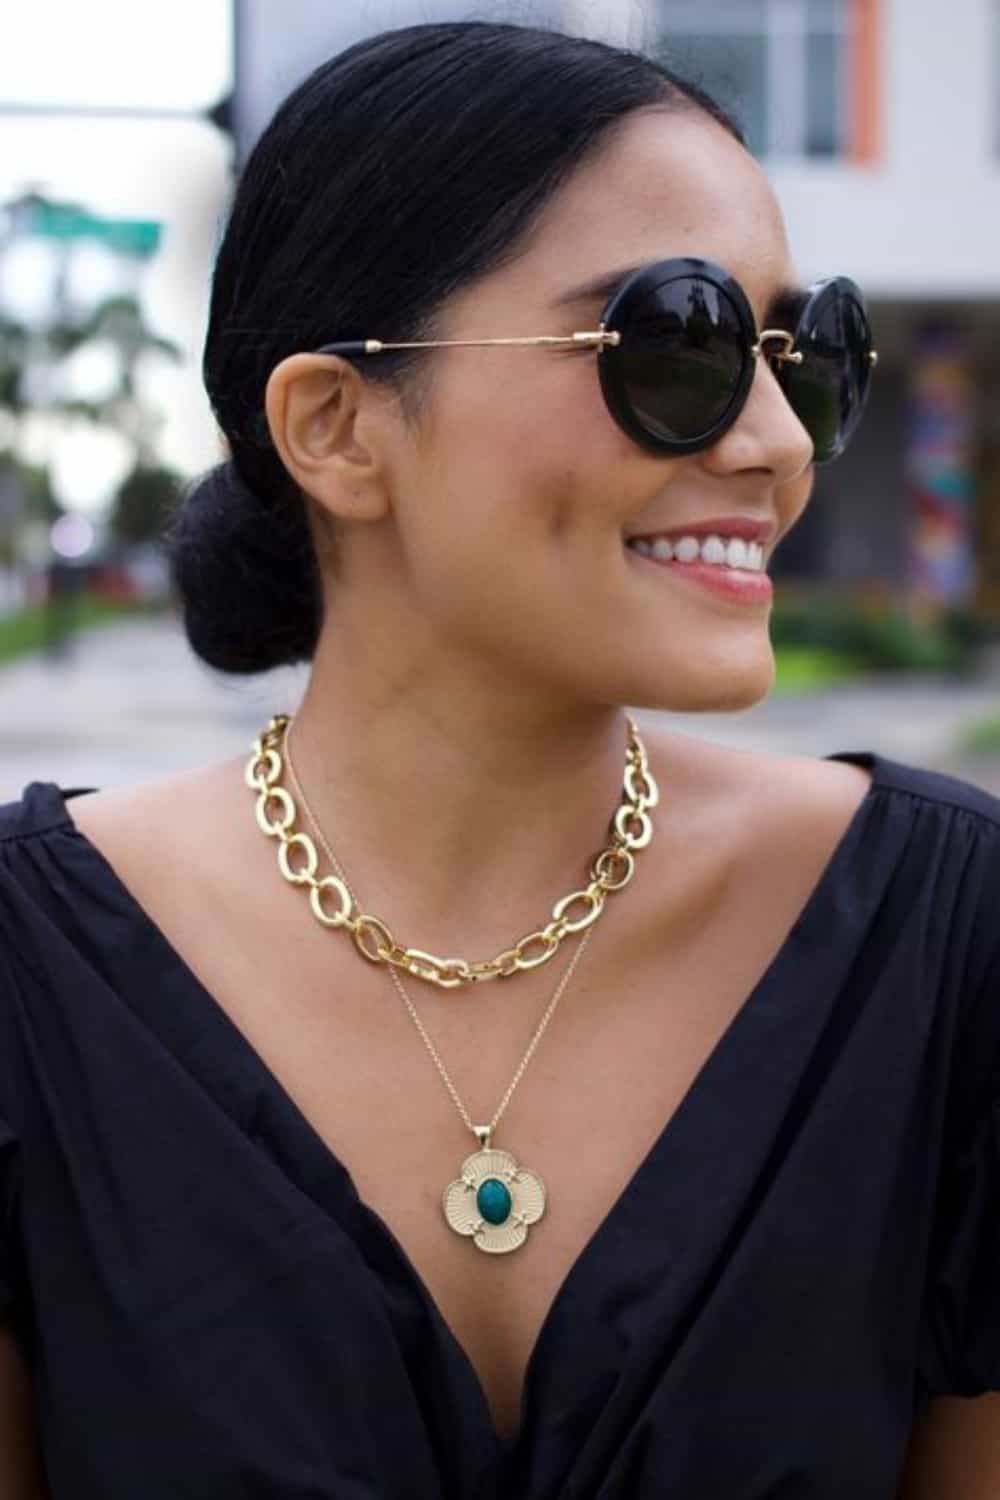 How To Layer Necklaces For Special Occasions